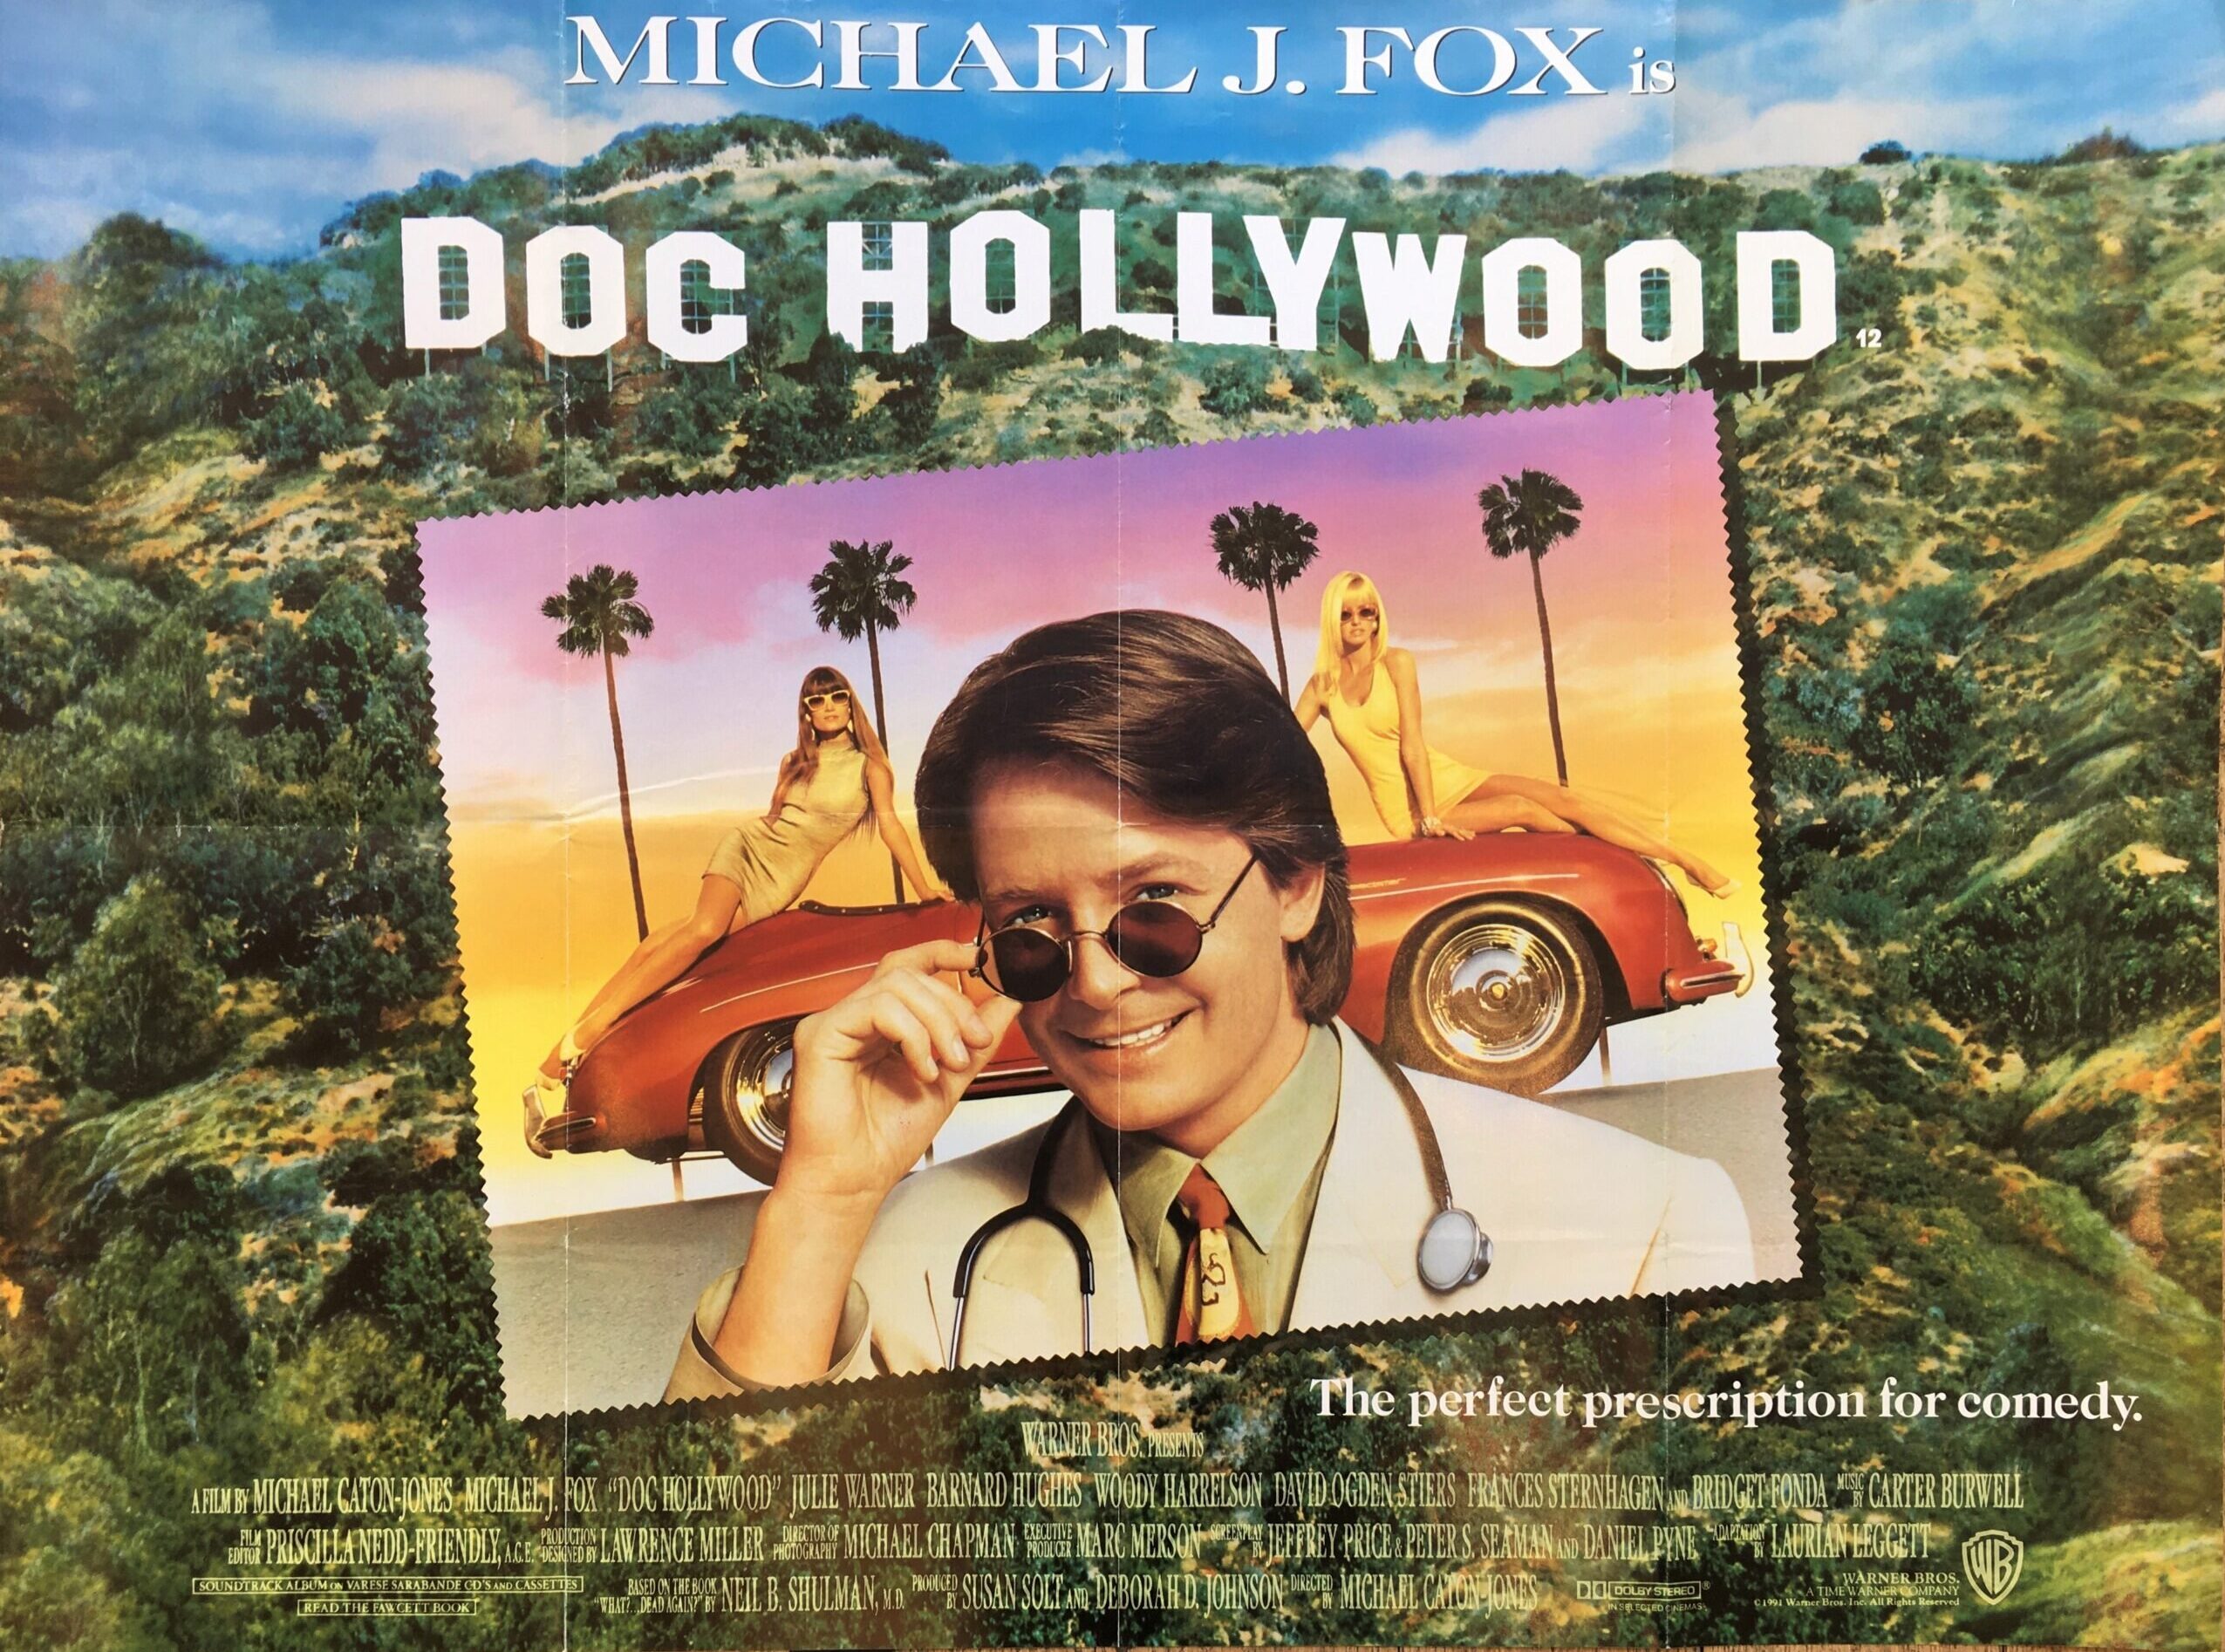 Original vintage cinema movie poster for the comedy, Doc Hollywood, starring Michael J Fox